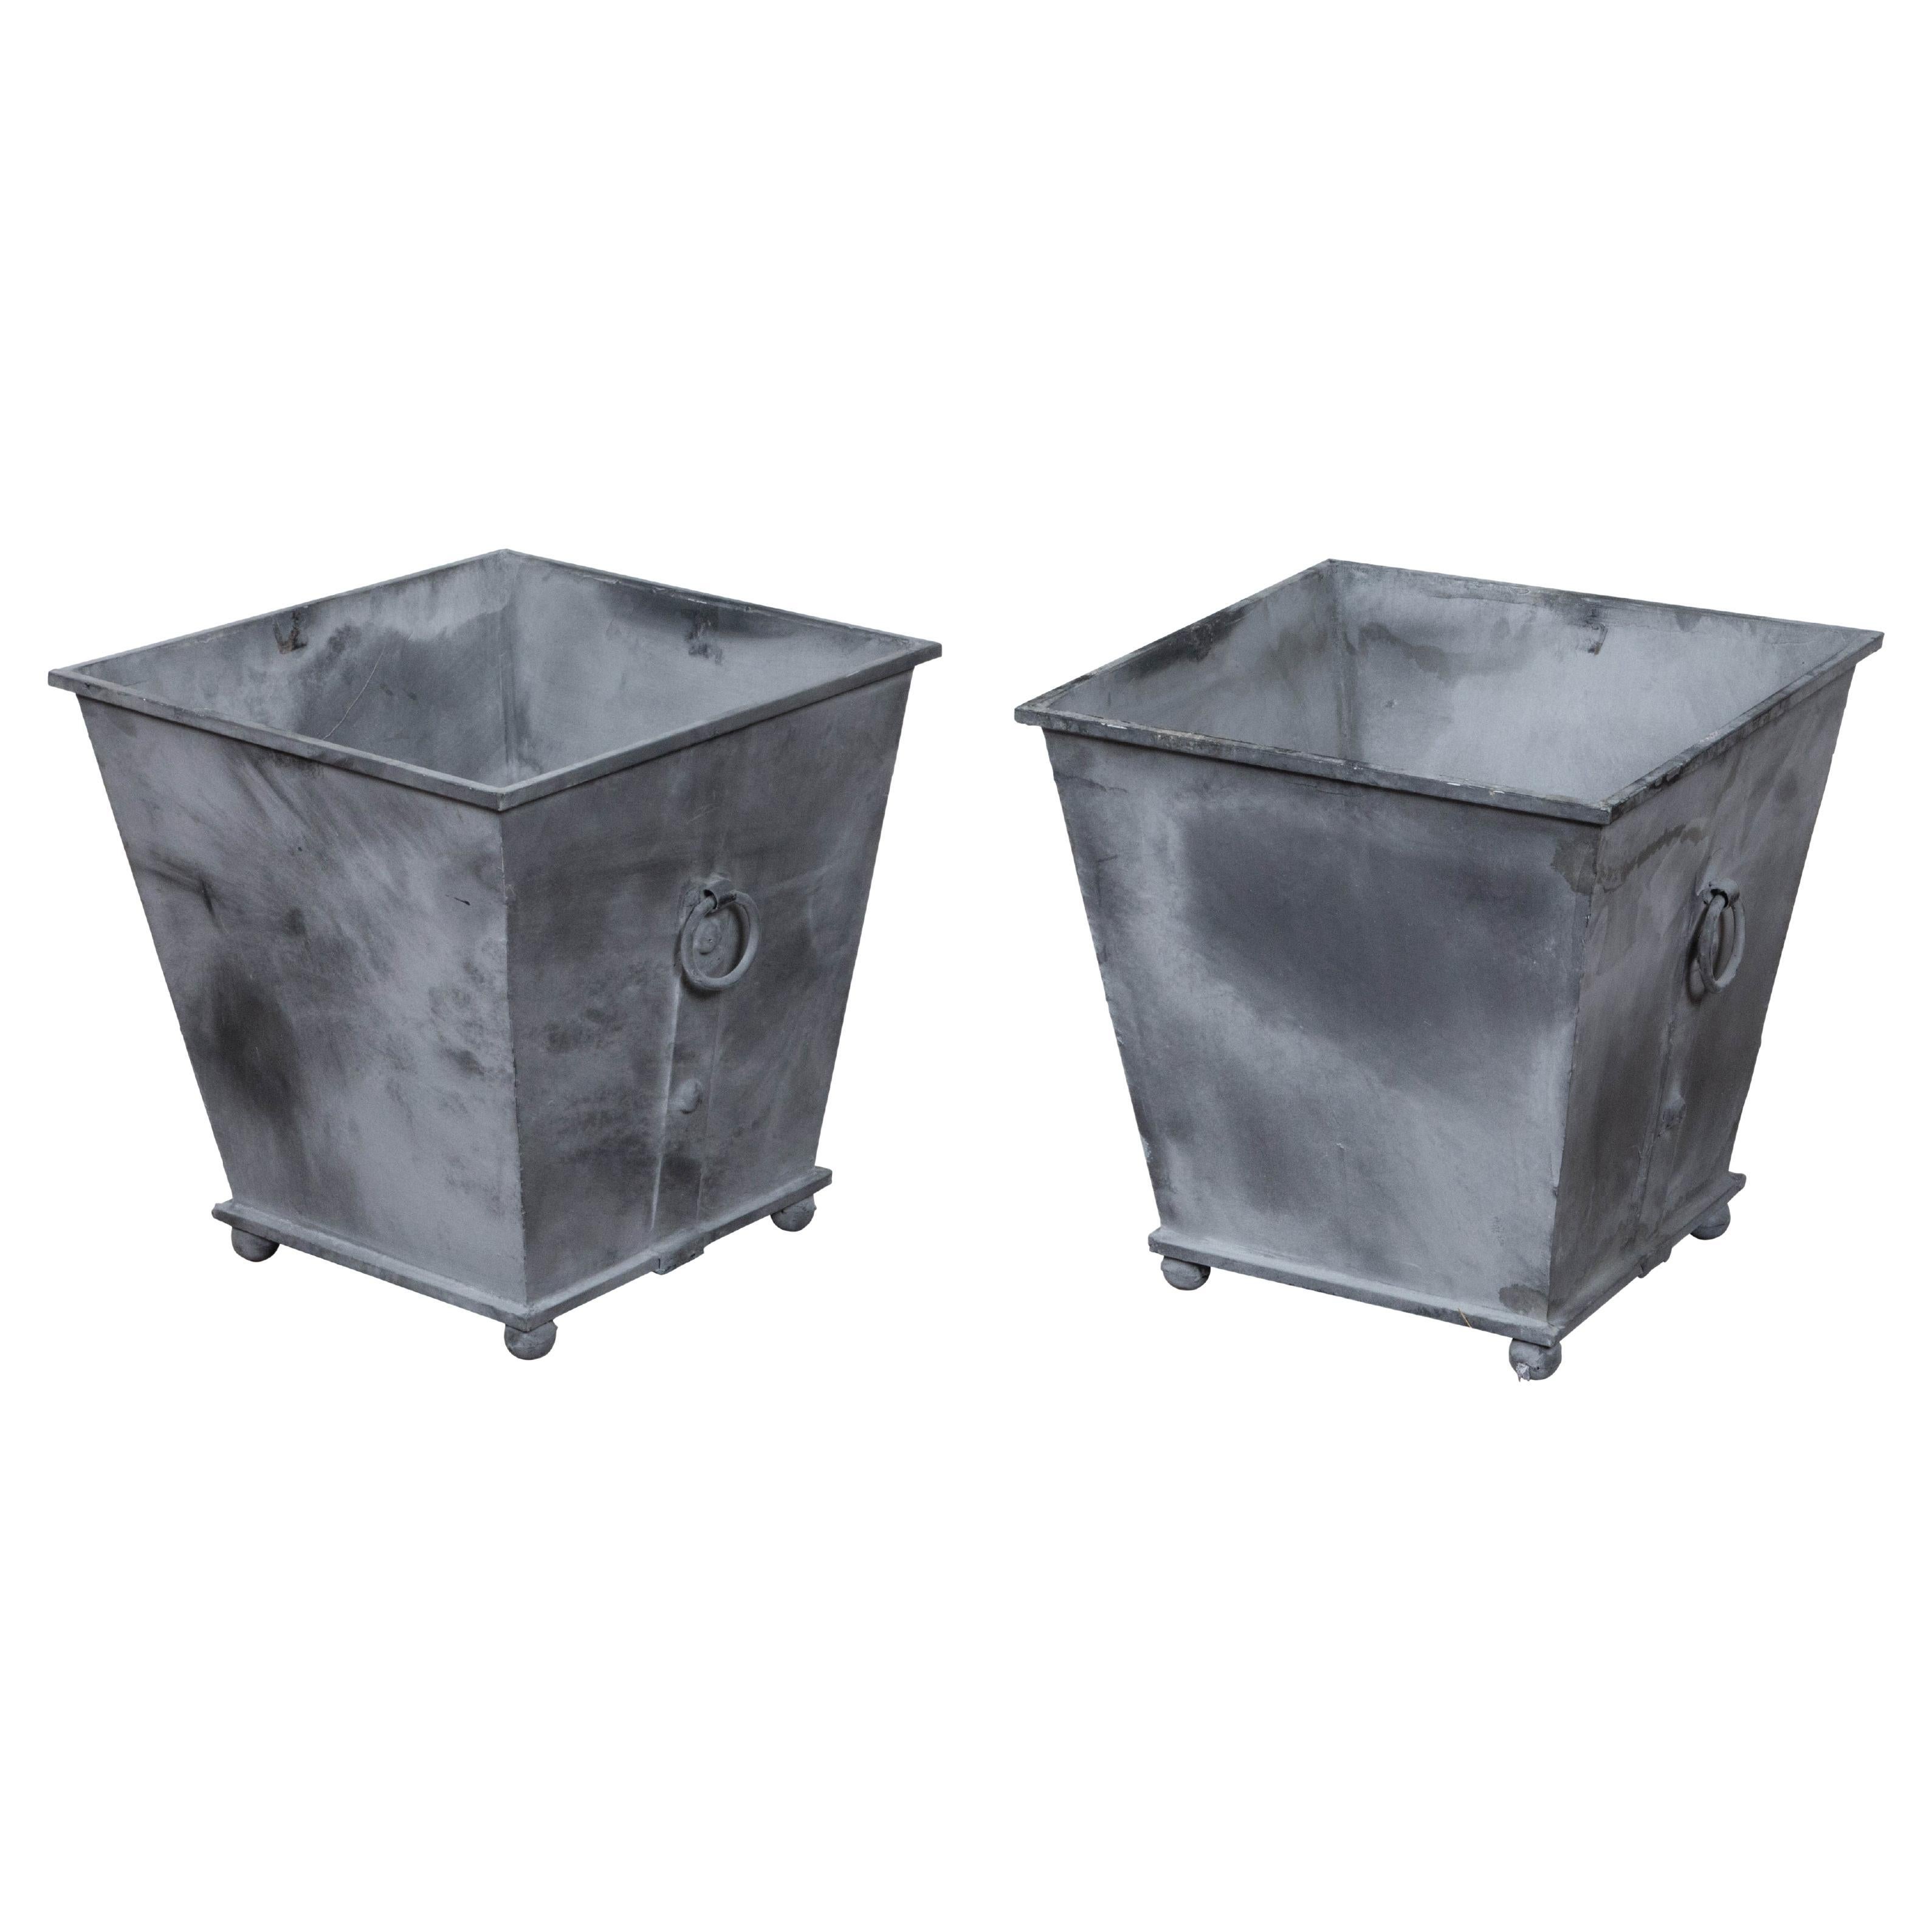 Pair of Vintage Grey Metal Planters with Tapered Lines, Ring Pulls and Ball Feet